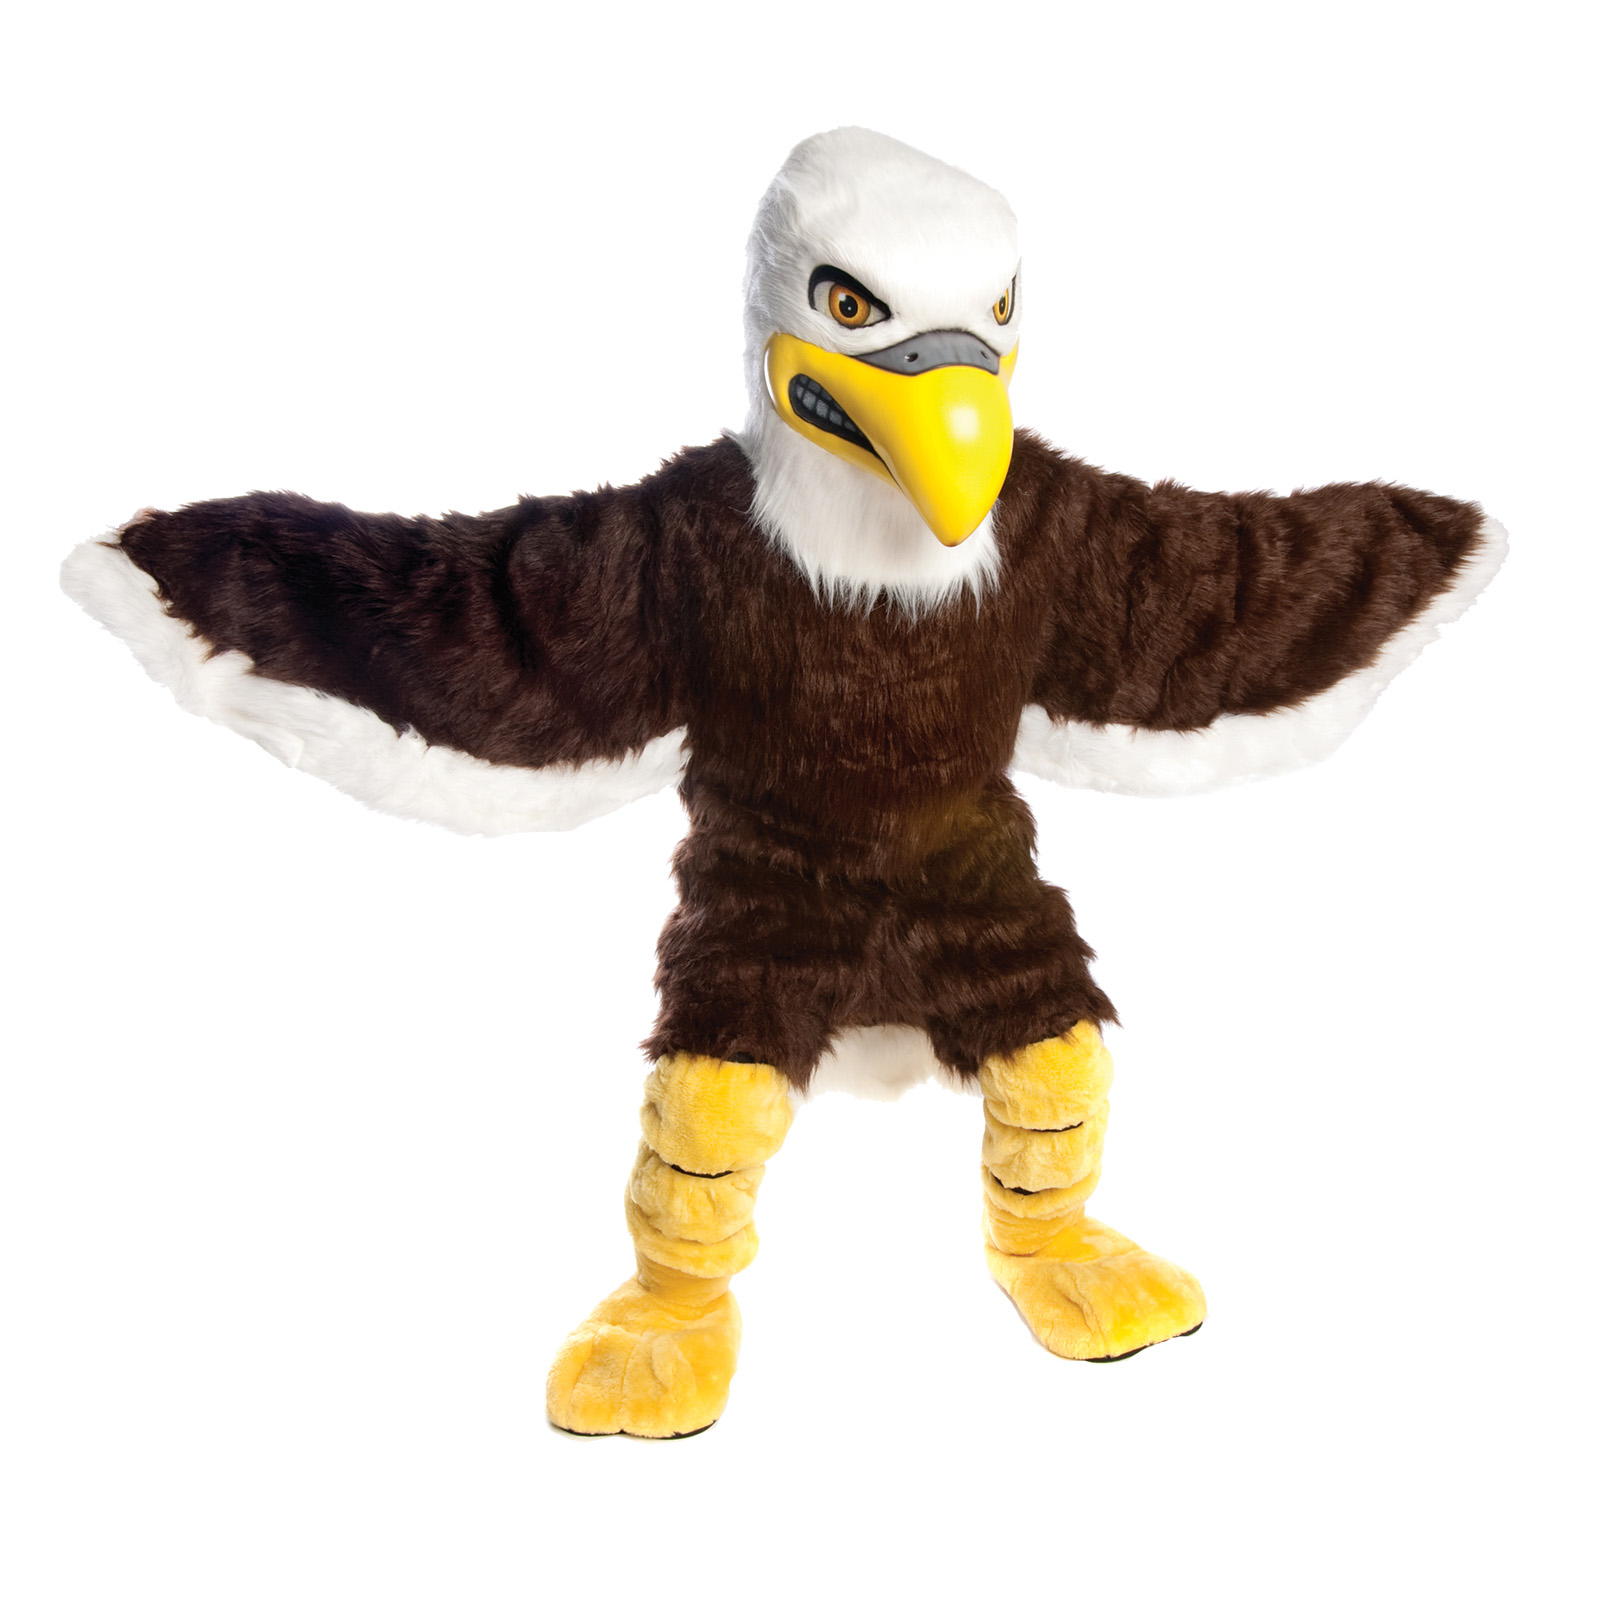 Feirce Eagle Mascot 42062 Maskus - Purchase Order Accepted One Size Fits Most / Upgrade to Parade Feet / As Pictured